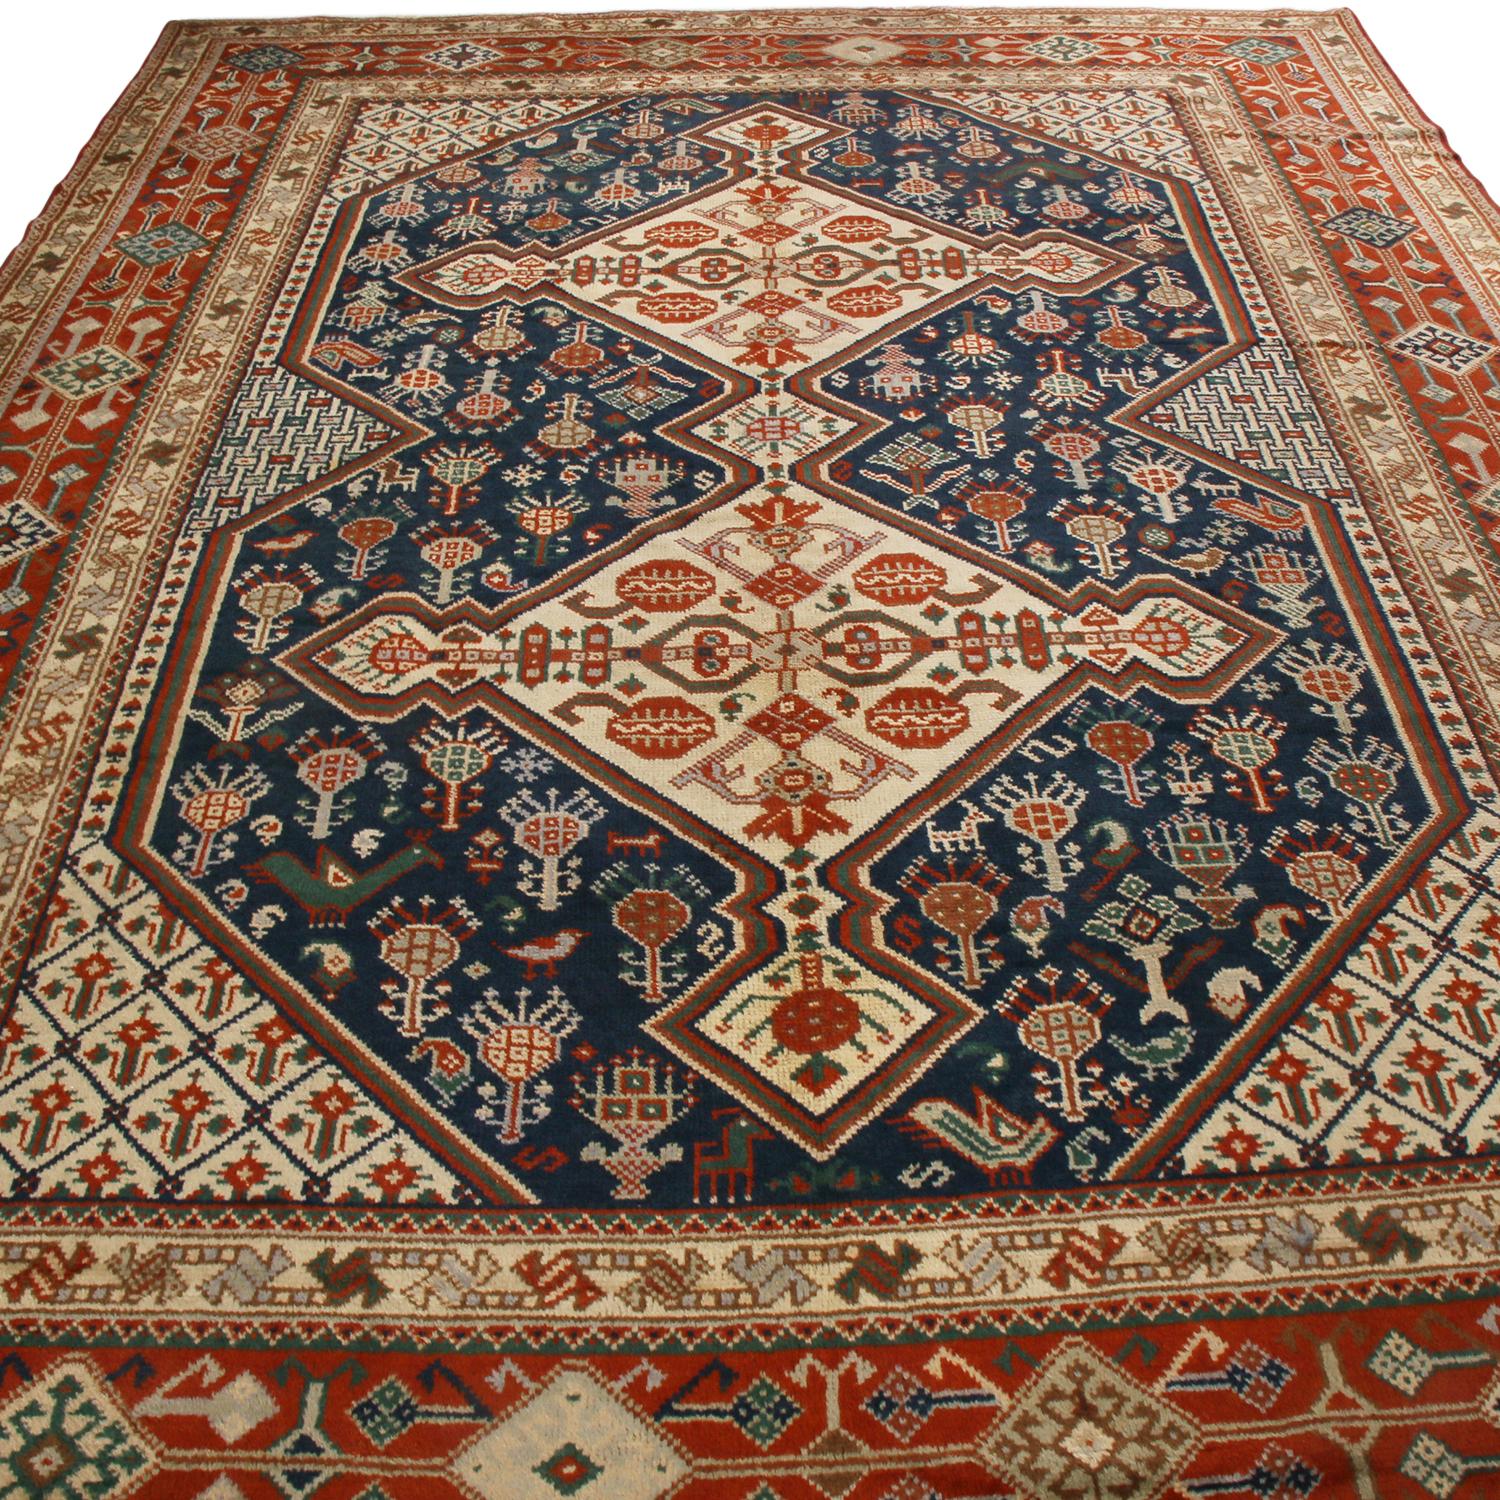 Originating from Ireland between 1890-1900, this antique Qasqhai wool rug presents an intriguing array of russet, navy blue, and beige colourways emphasizing the tasteful dimensionality of its medallion field design, a level of detail seldom seen